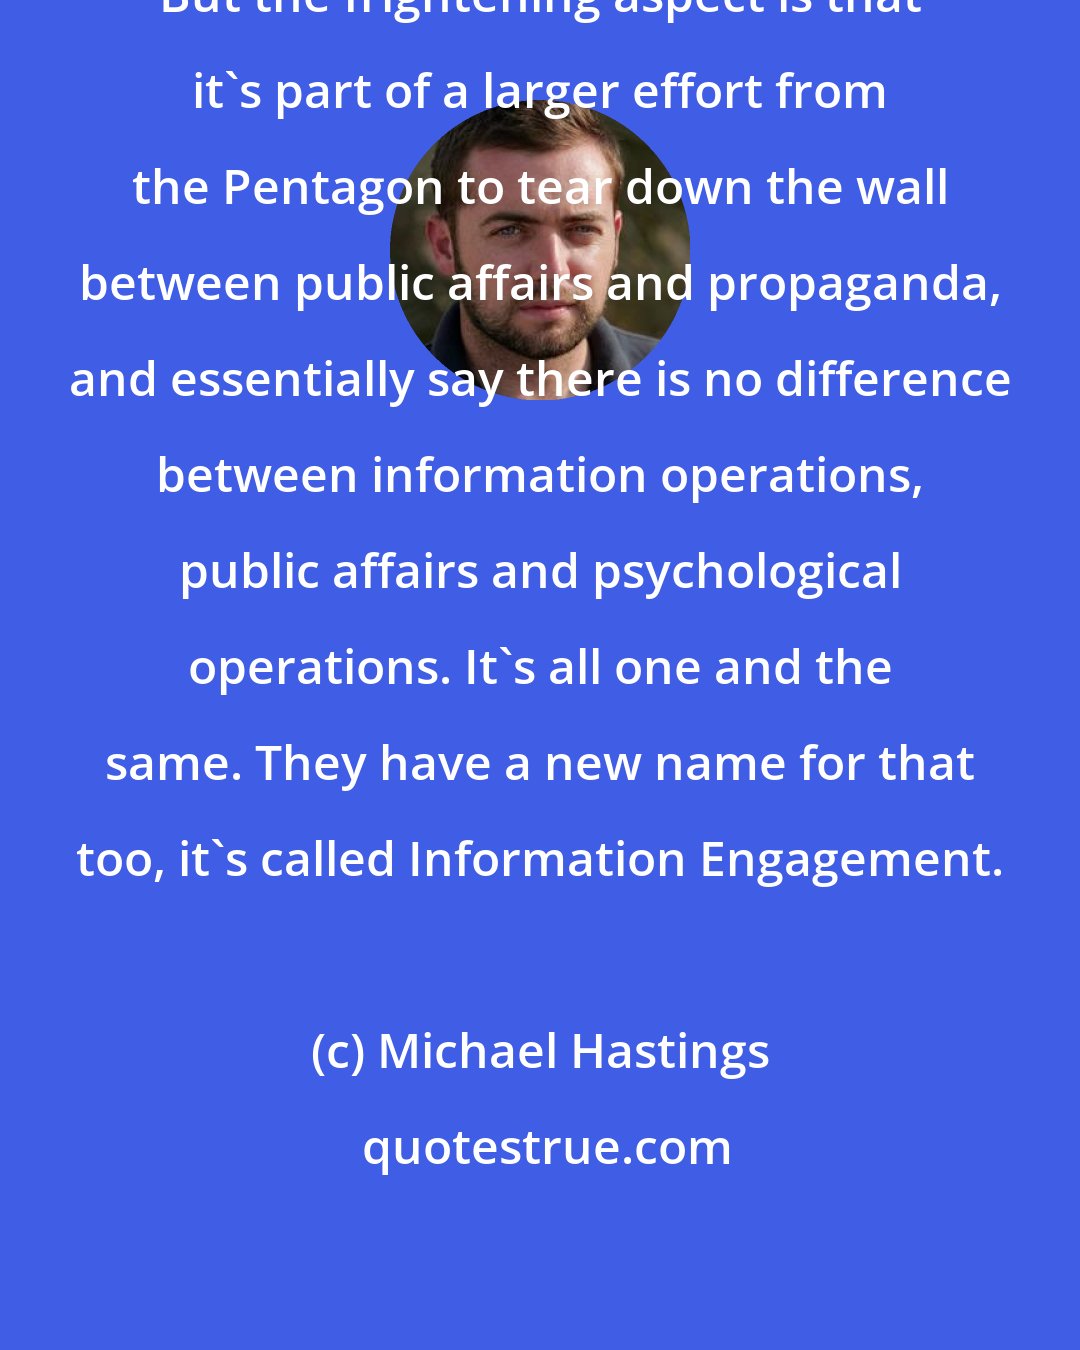 Michael Hastings: But the frightening aspect is that it's part of a larger effort from the Pentagon to tear down the wall between public affairs and propaganda, and essentially say there is no difference between information operations, public affairs and psychological operations. It's all one and the same. They have a new name for that too, it's called Information Engagement.